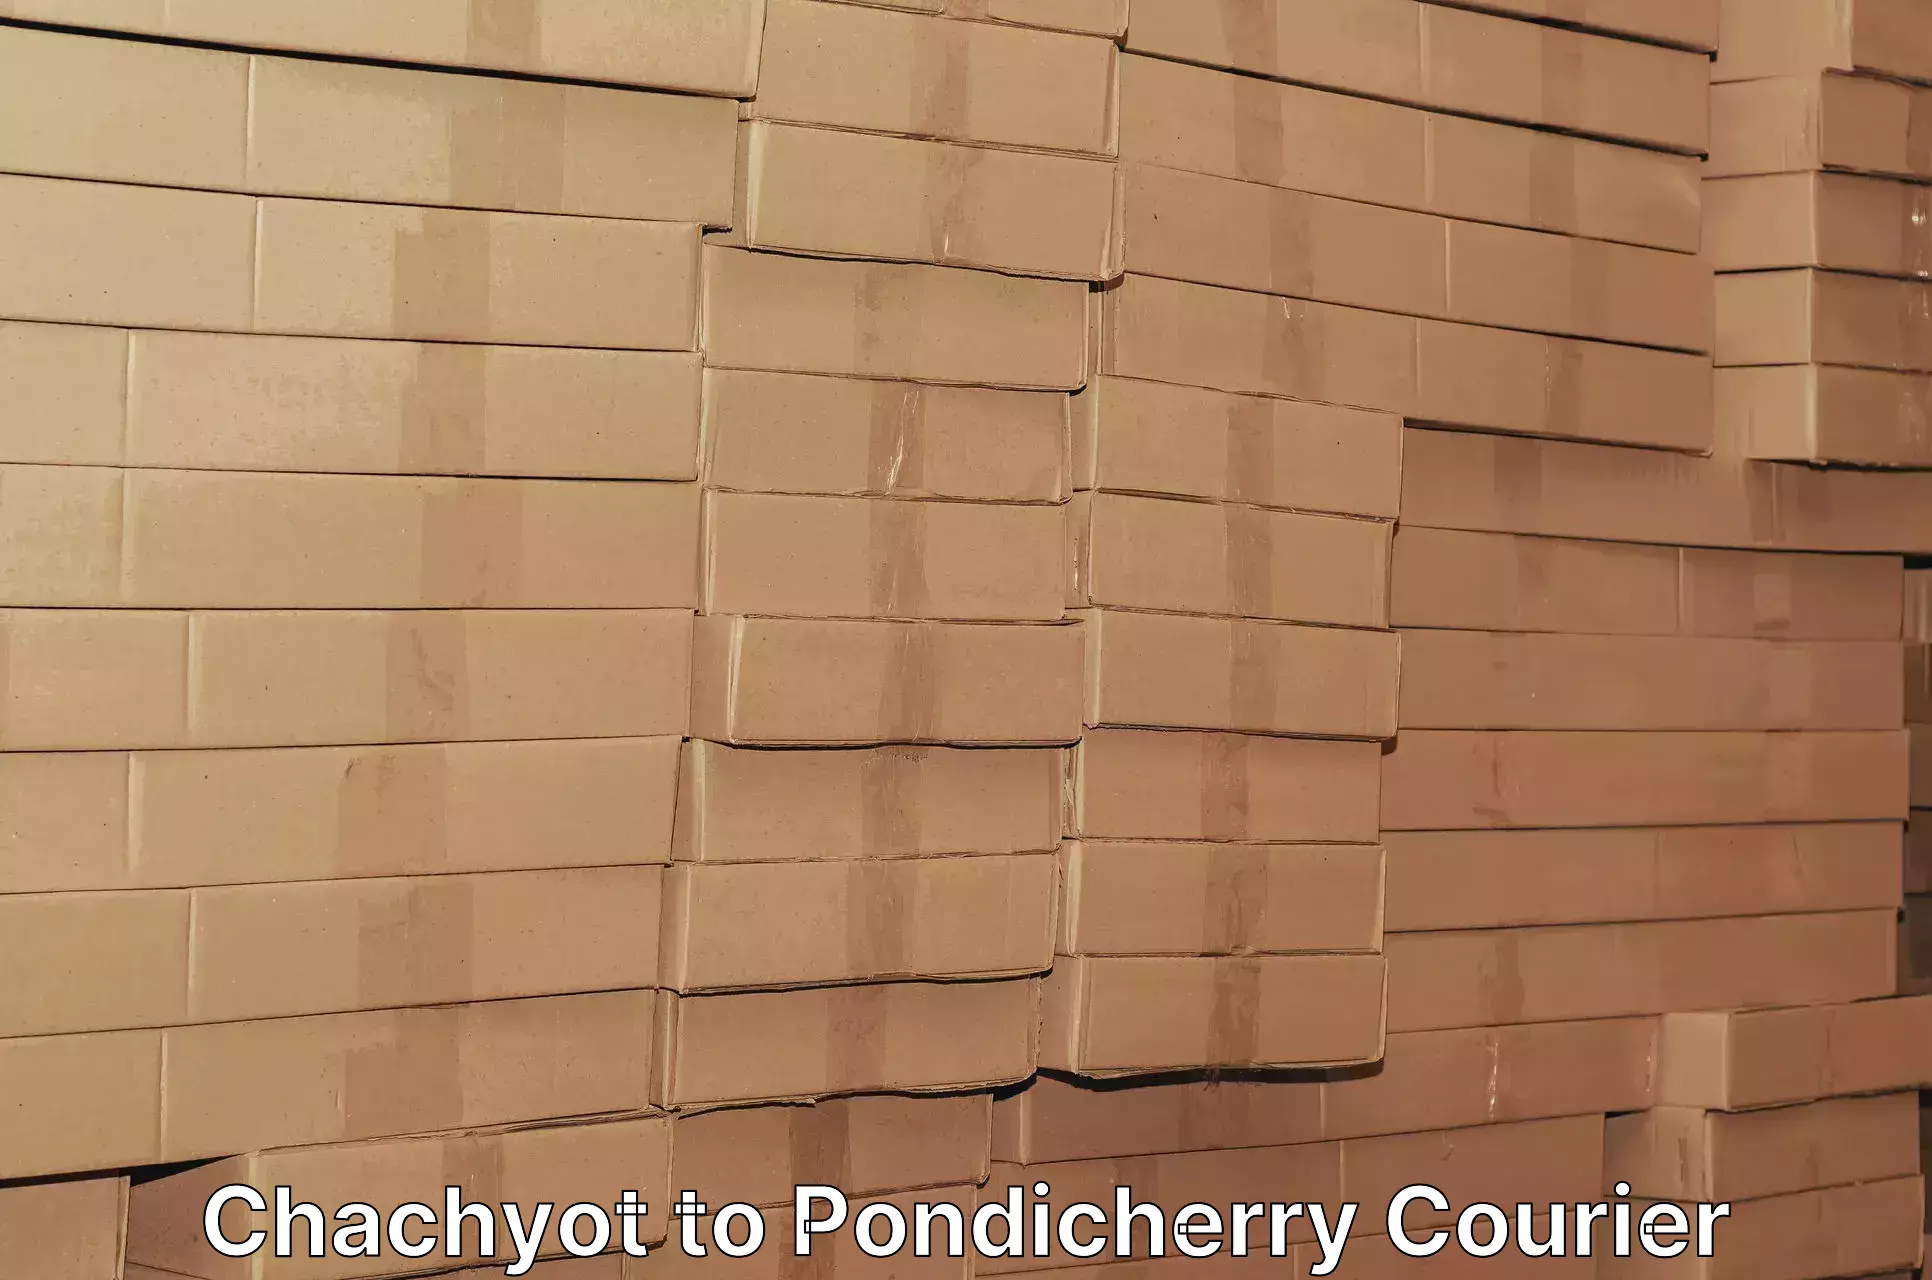 Sustainable shipping practices Chachyot to Pondicherry